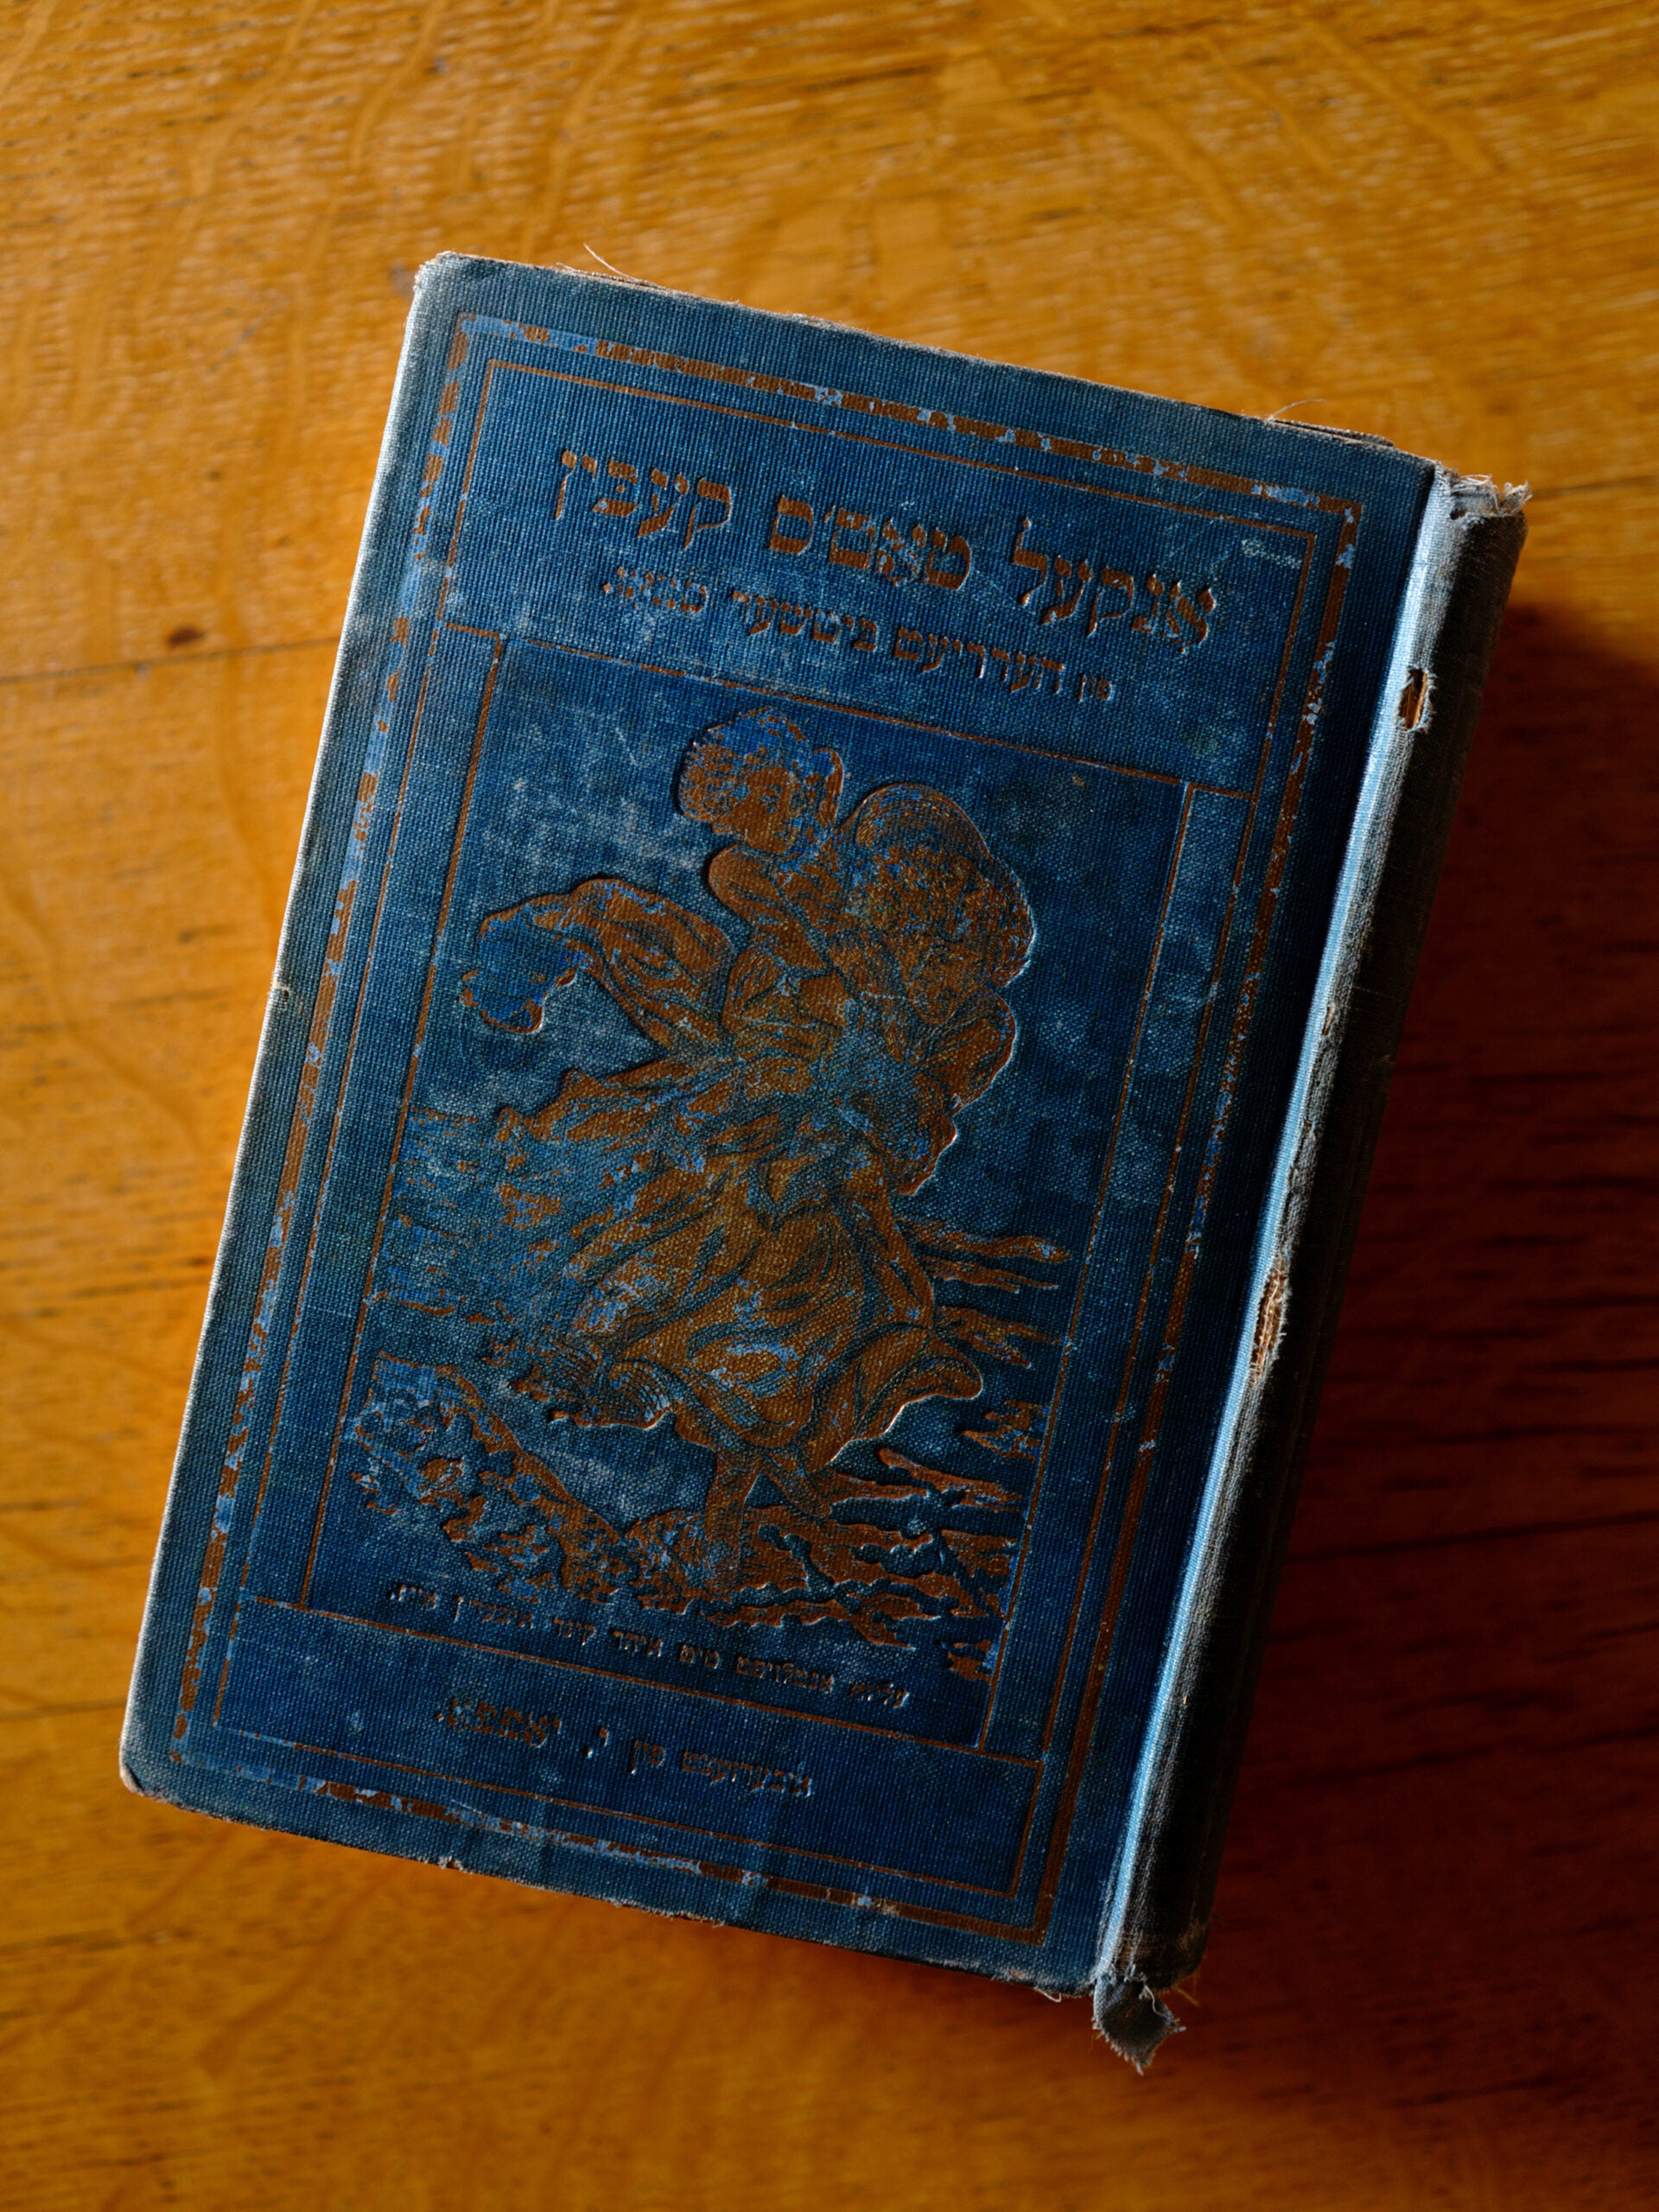 A blue cover of a Yiddish translation of “Uncle Tom’s Cabin.”